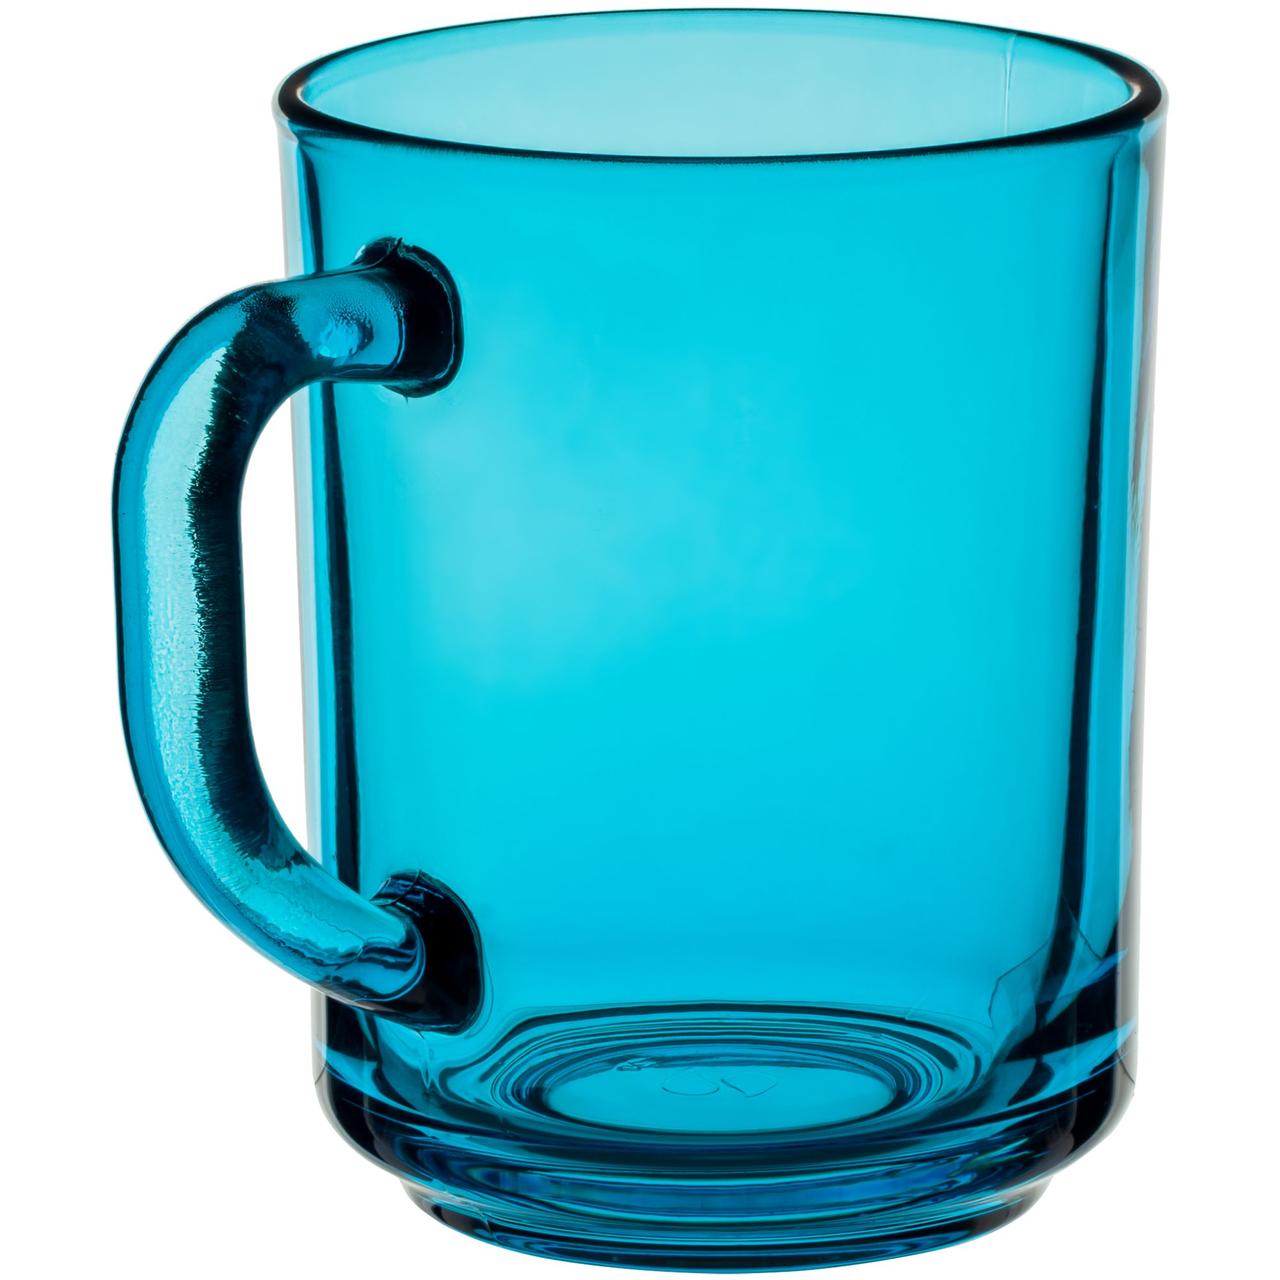 Glass cup images